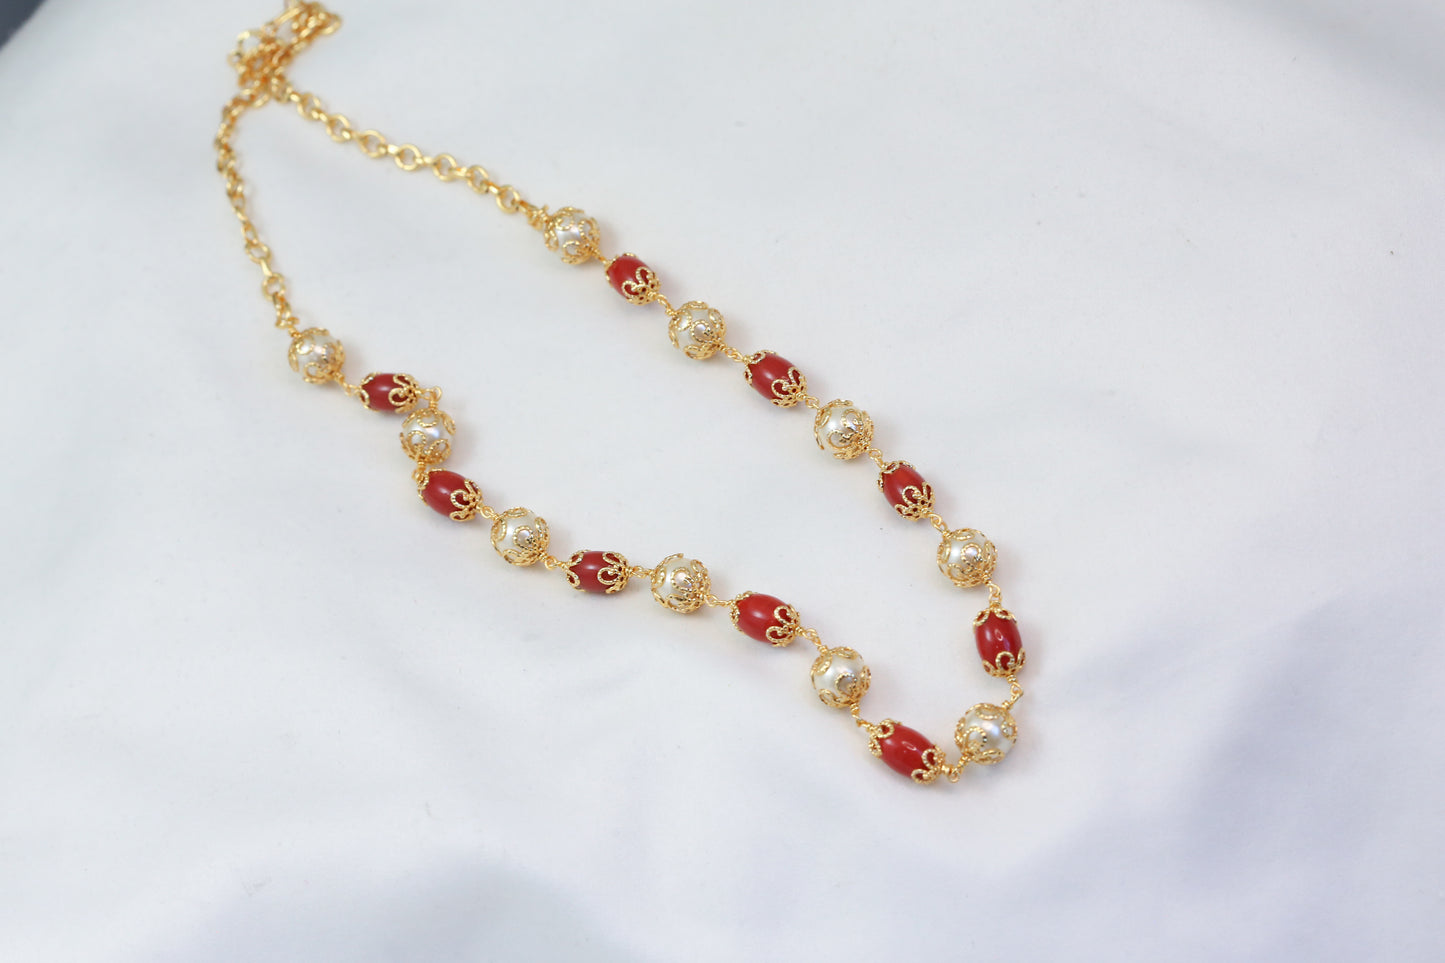 Coral & Pearl Beaded Necklace